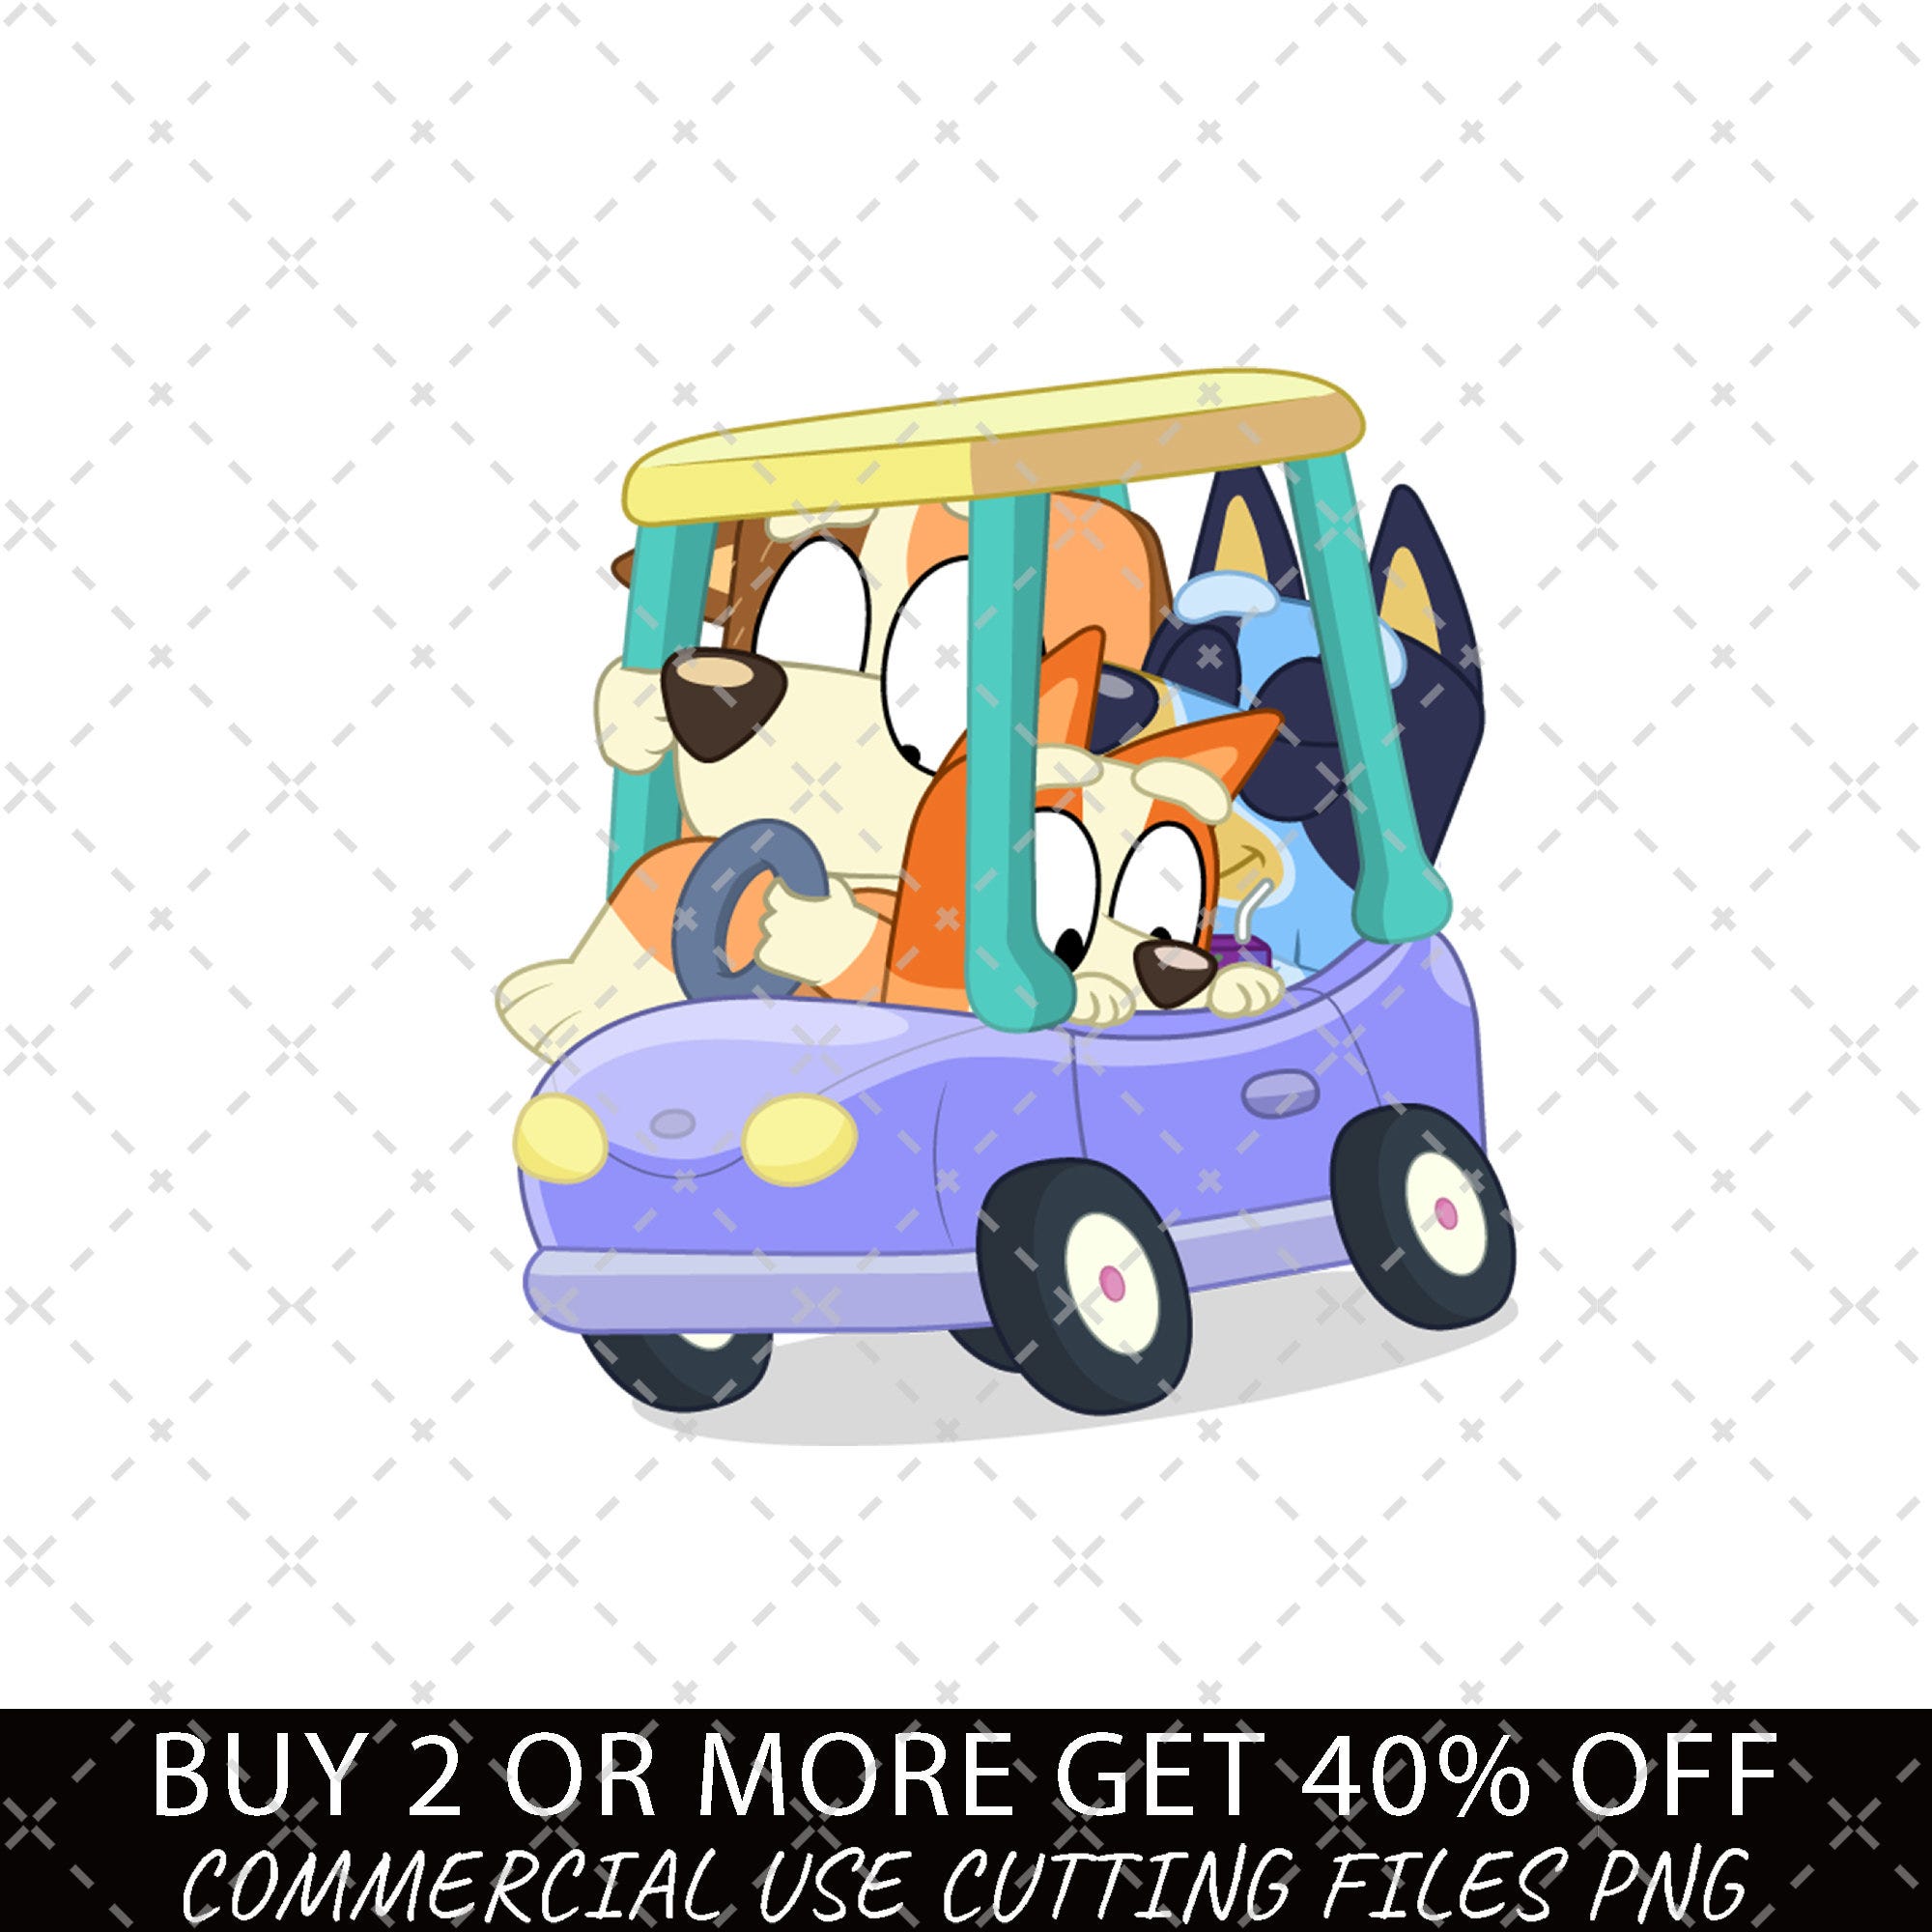 Bluey Family In The Car Png, Bluey Friends Instant Download Png, Ready to Print Bluey Png File, Bluey And Friends Digital Png